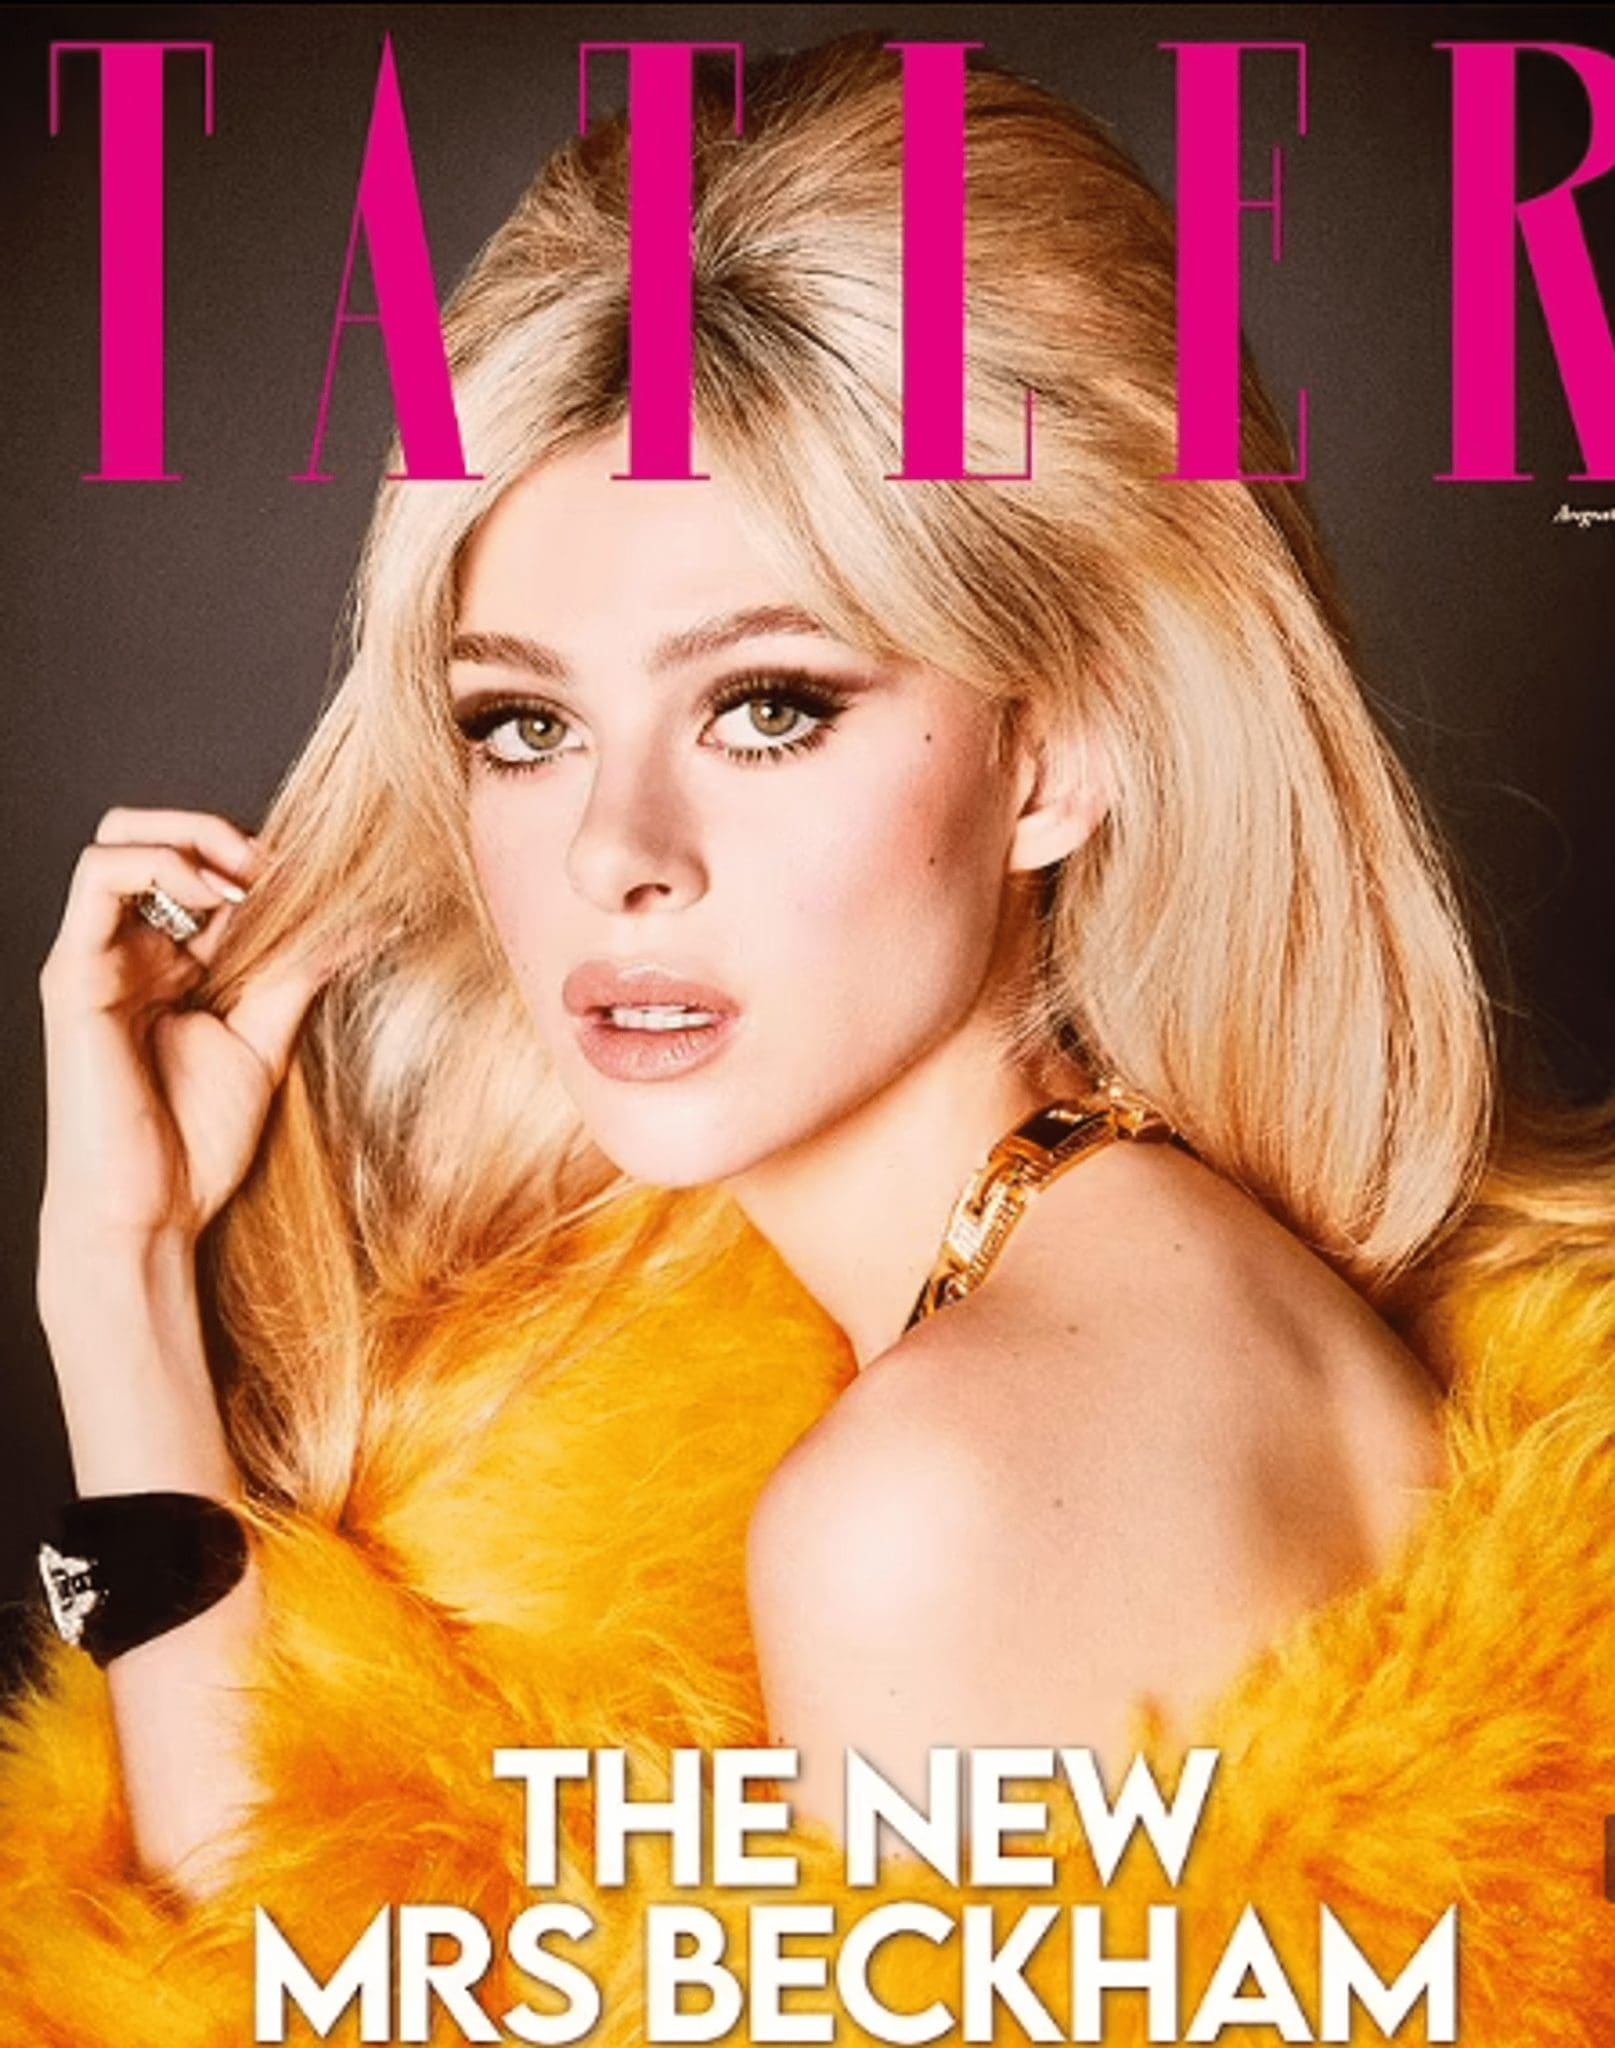 Nicola Peltz posed for the cover of Tatler and spoke about her marriage to Brooklyn Beckham